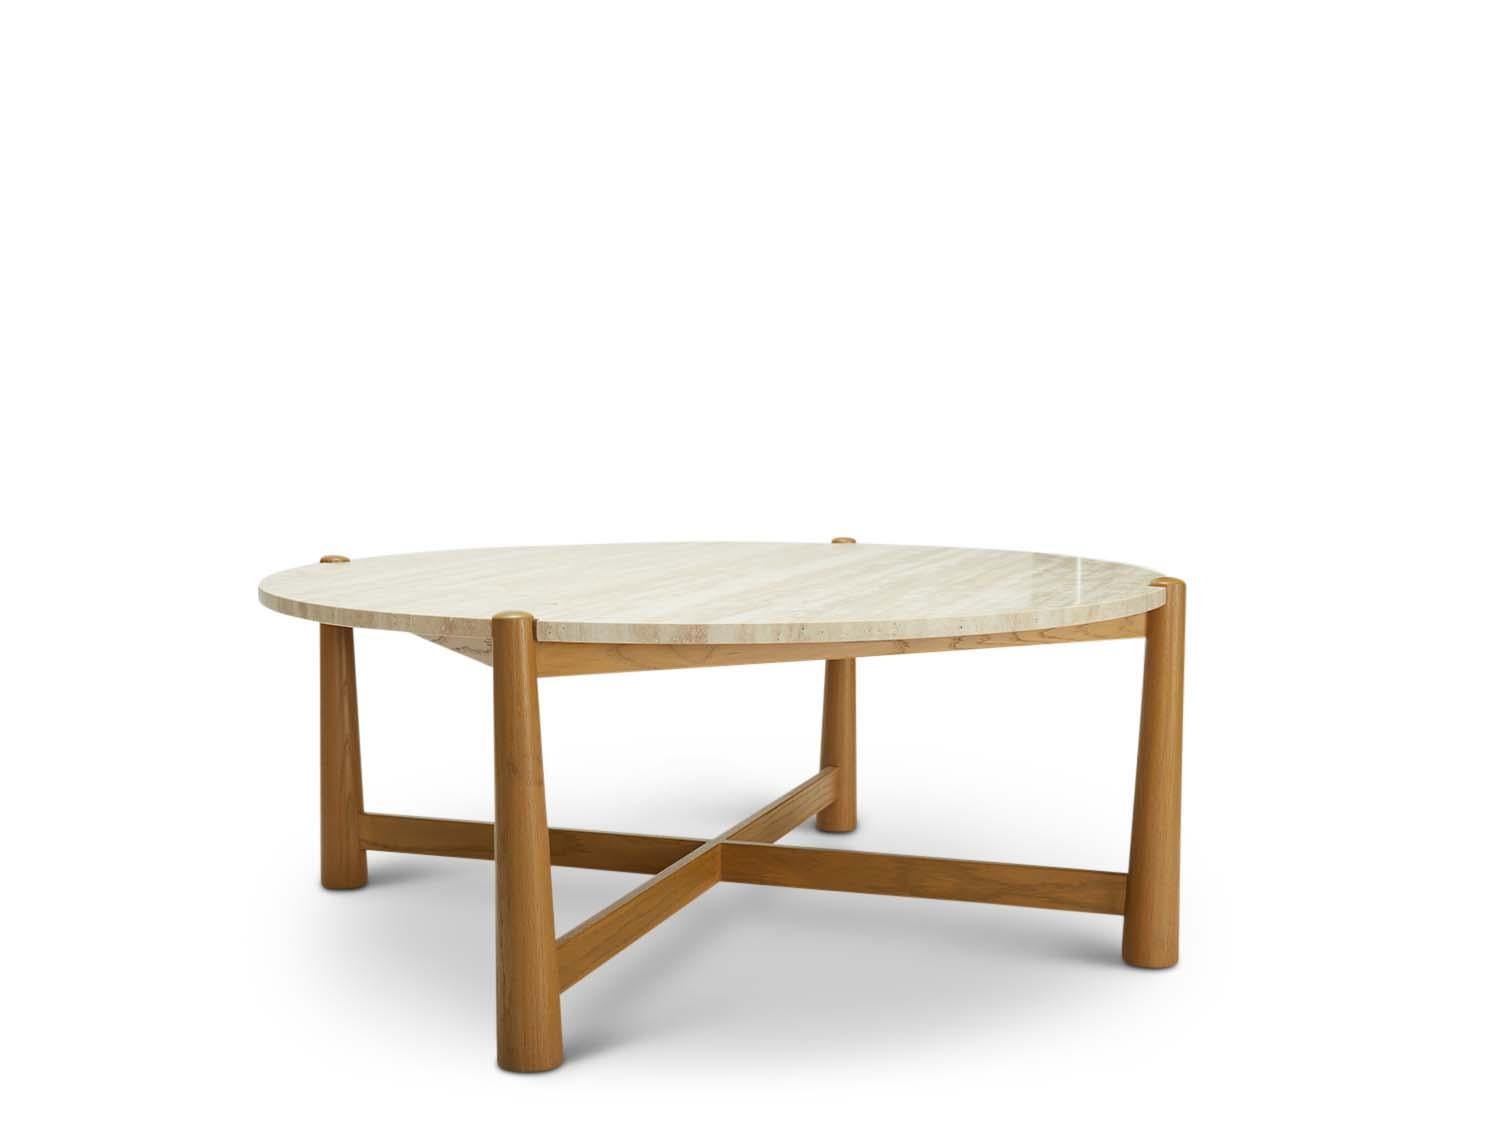 The Bronson Coffee Table features a Stone Top with notched corners that rests atop a detailed American walnut or white oak base.

The Lawson-Fenning Collection is designed and handmade in Los Angeles, California. Reach out to discover what options